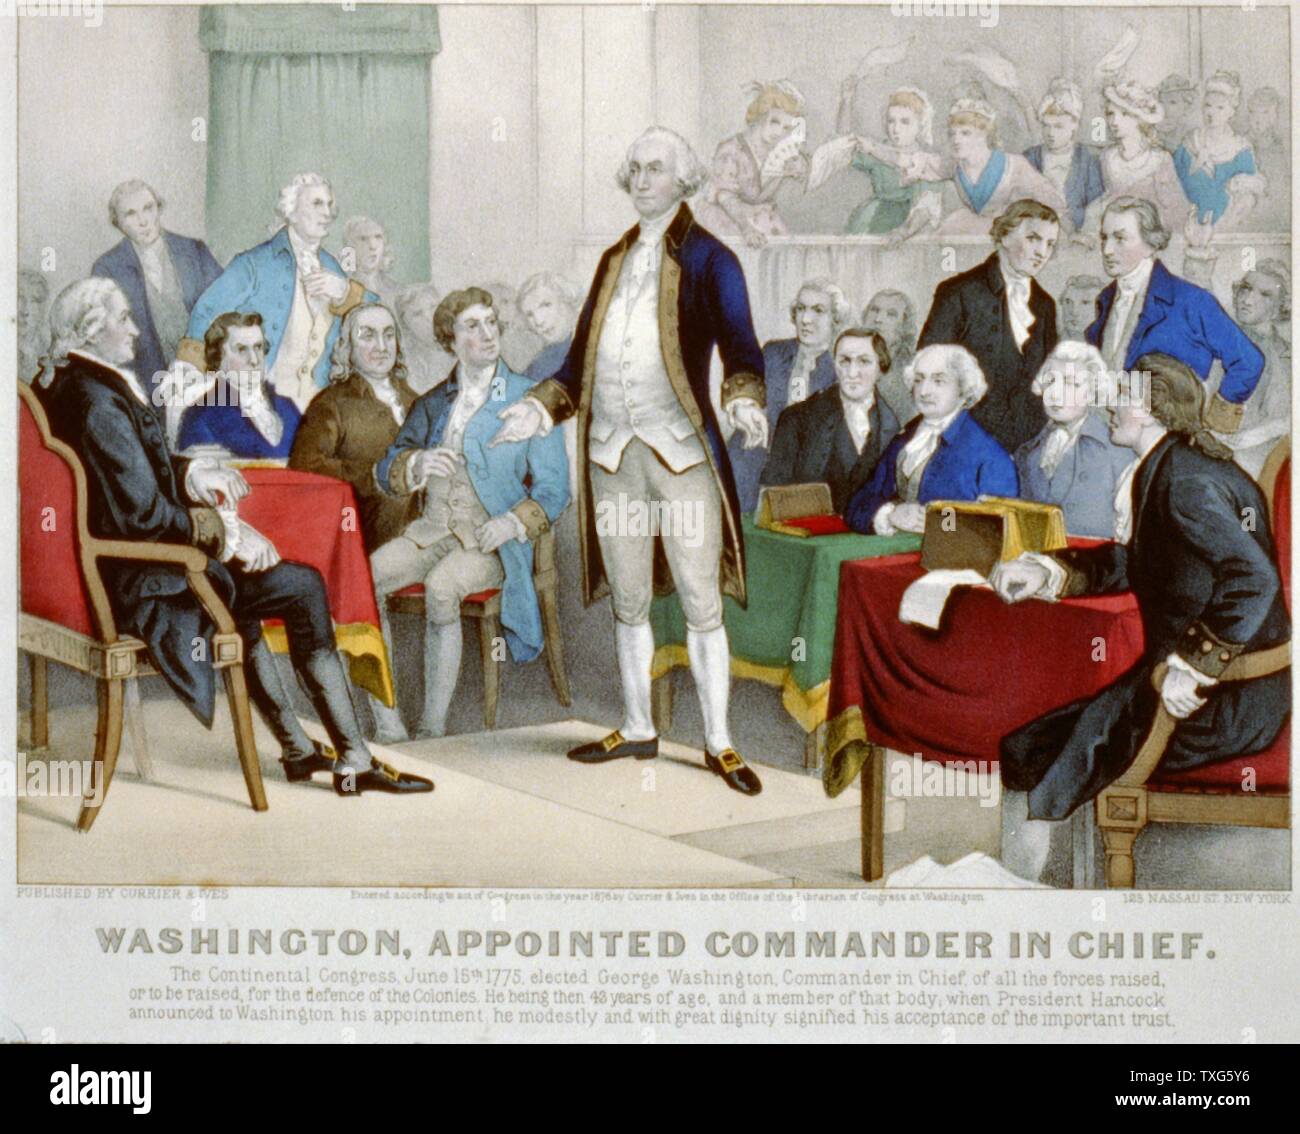 American Revolutionary War (American War of Independence) 1775-1783 : Washington appointed commander-in-chief  by the Continental Congress, delegates from the Thirteen Counties that became  the government of the United States. June 1775.   Lithograph Stock Photo